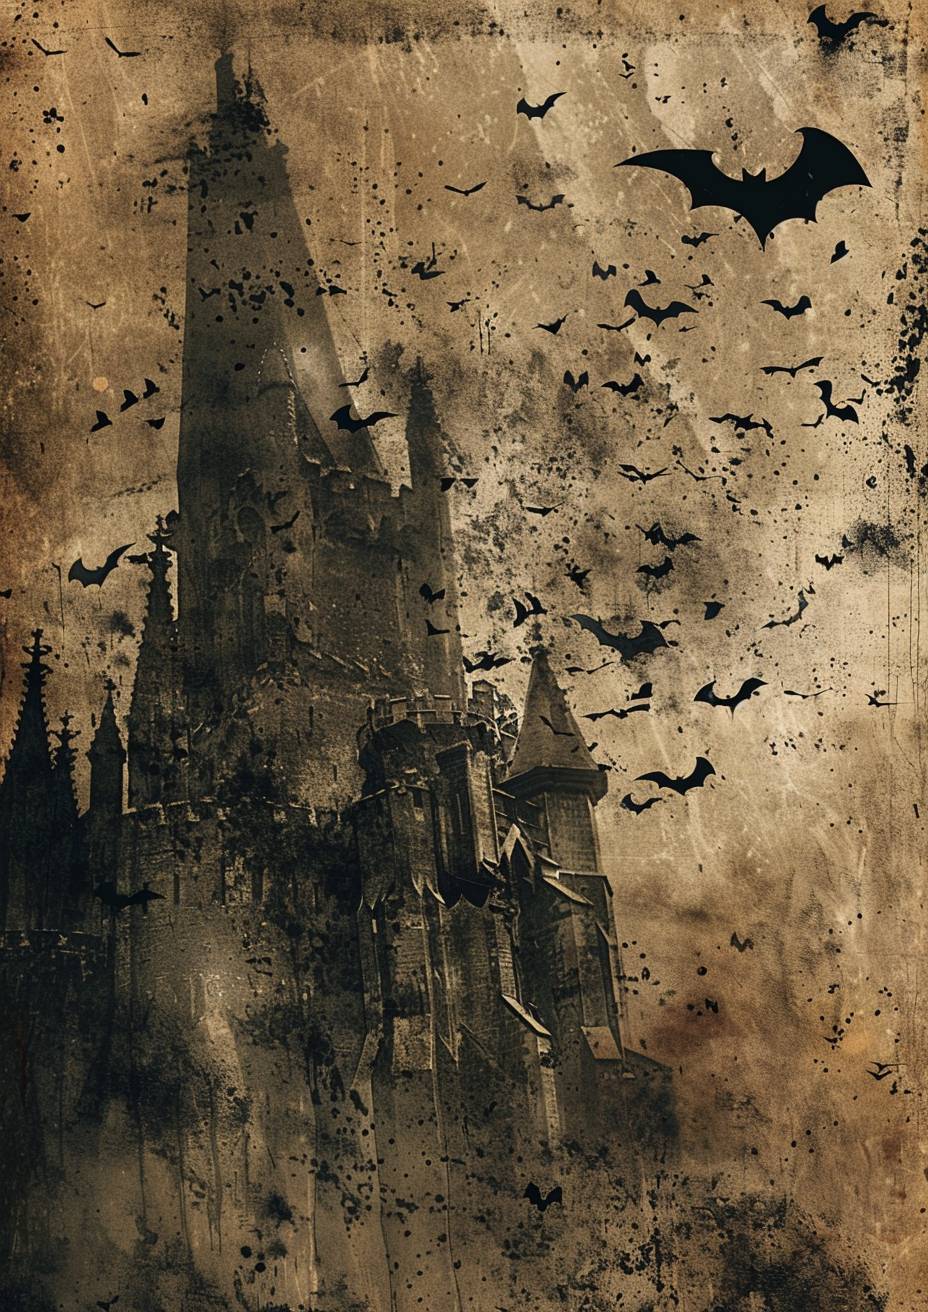 A dark tower, flying bats, in the style of medieval marginalia, minimalism